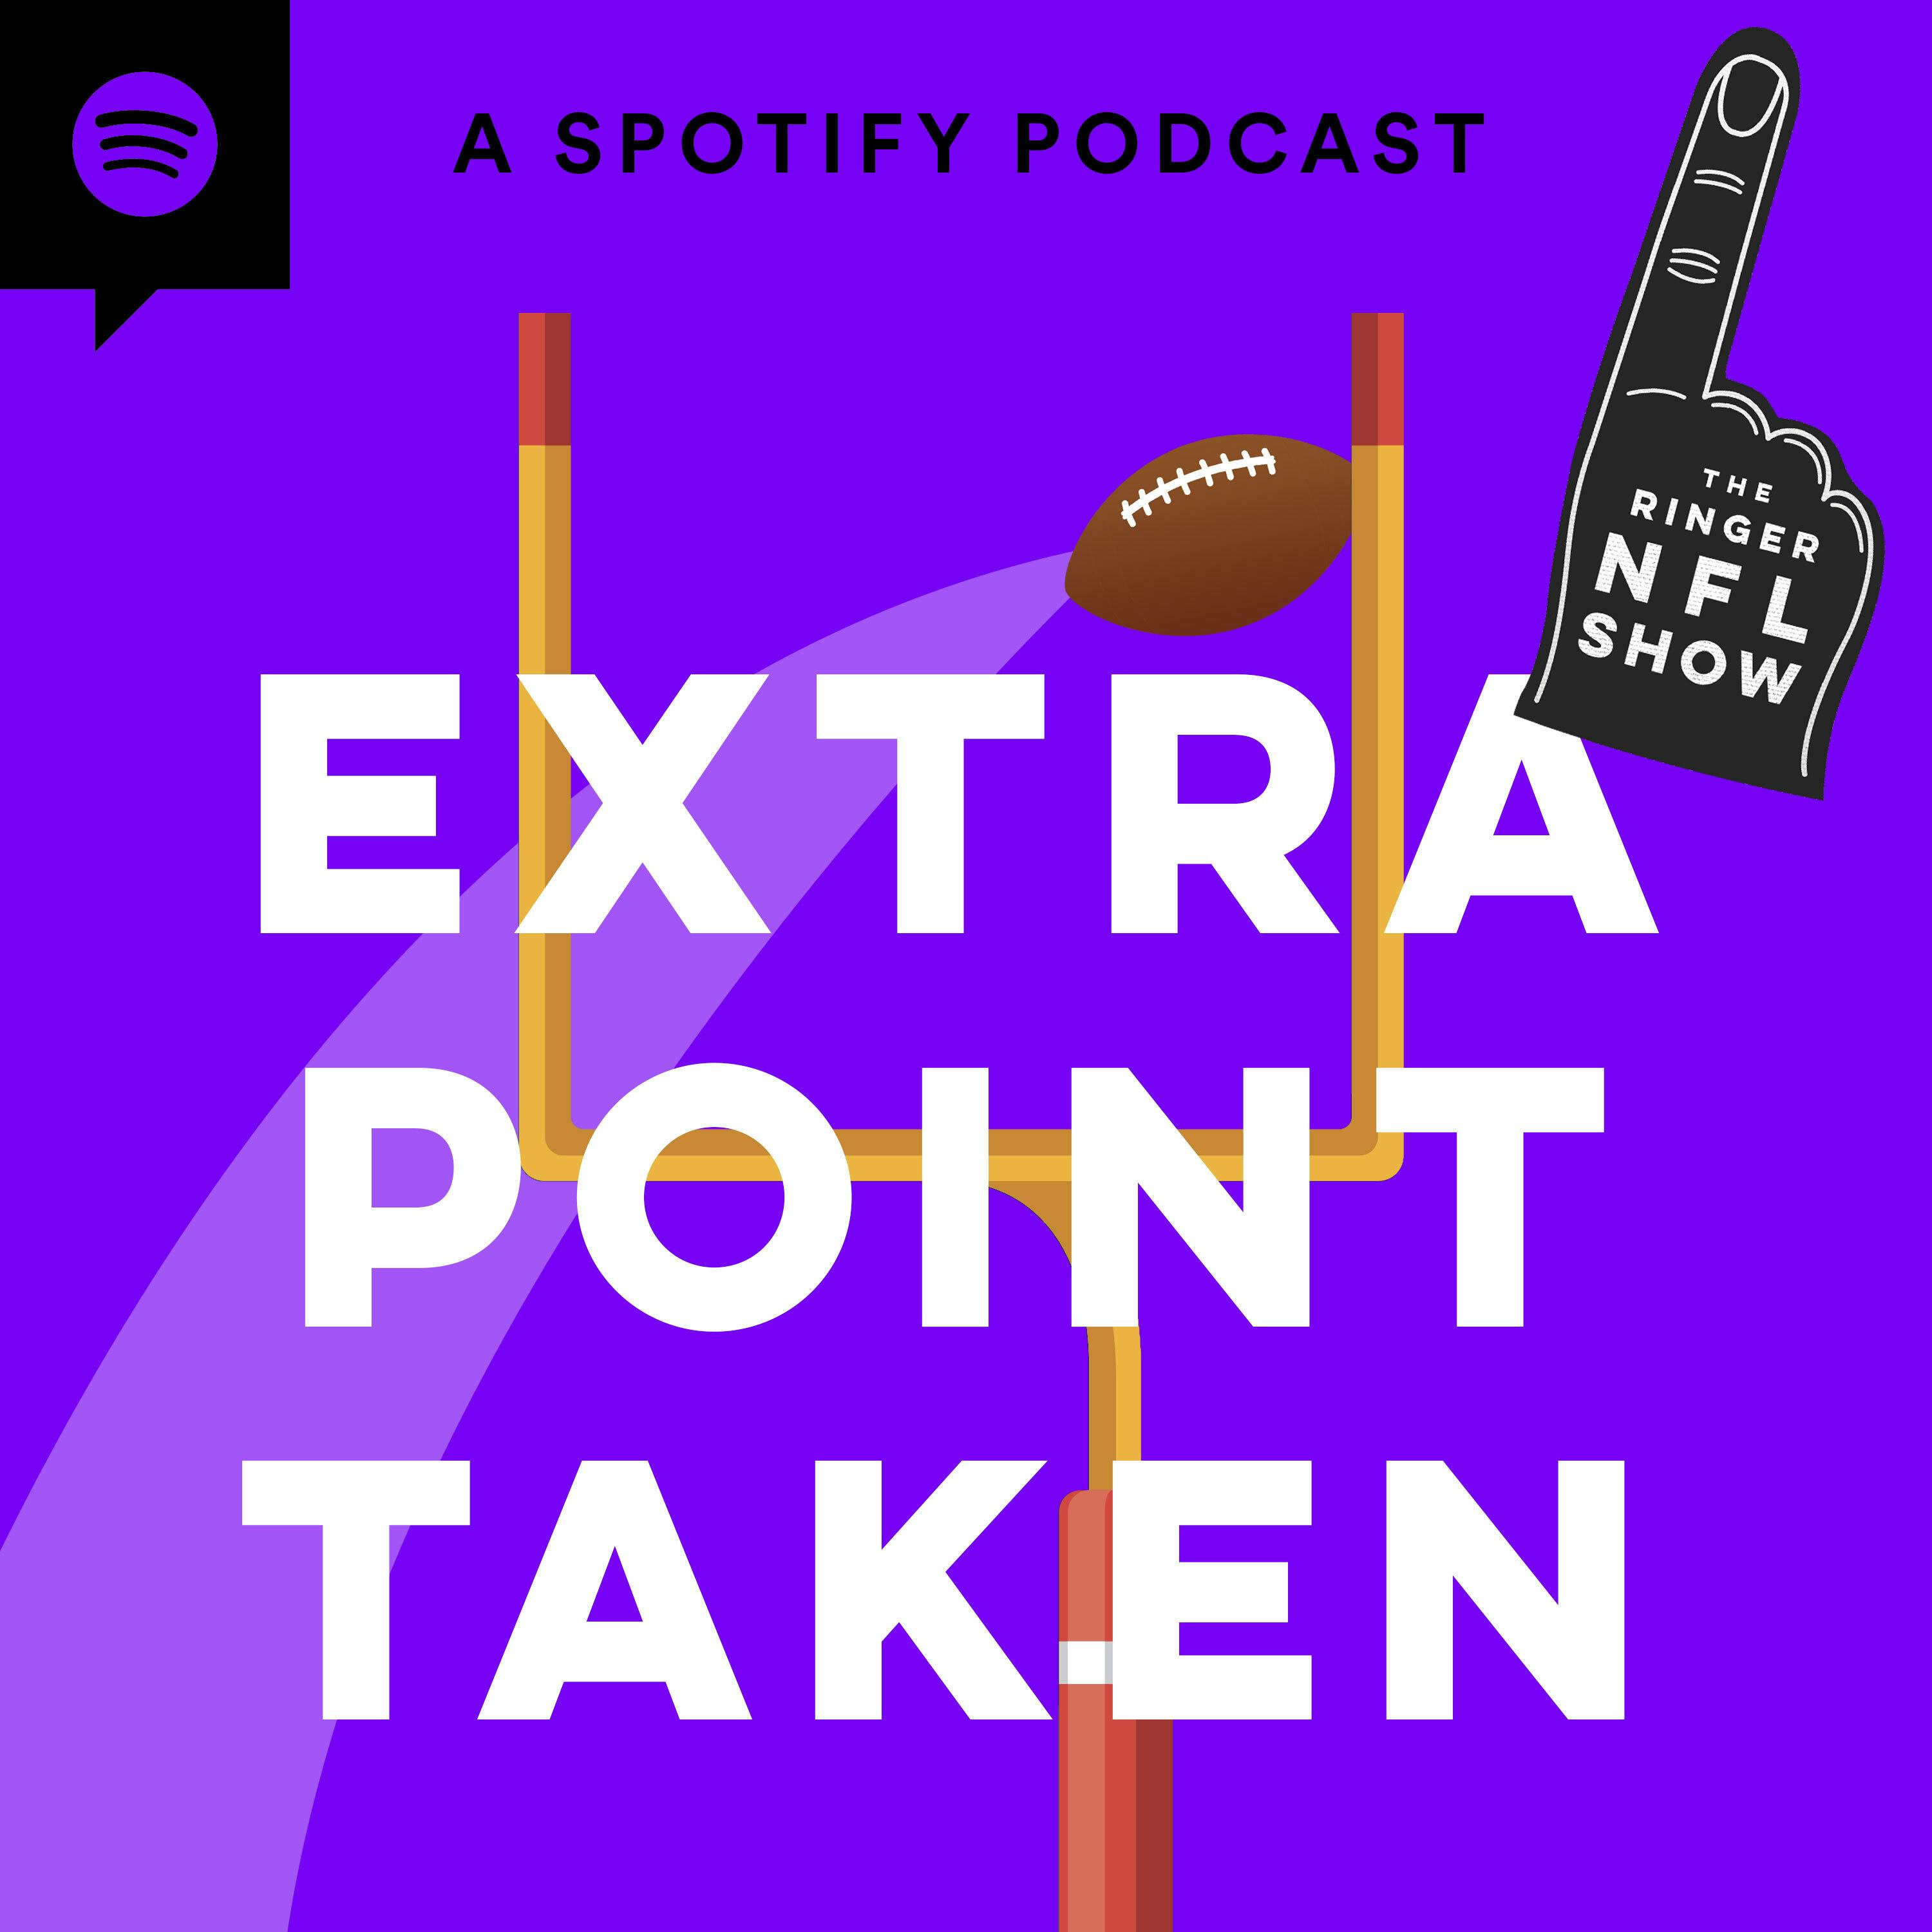 NFL Week 13 Picks, Props, and Predictions! | Extra Point Taken